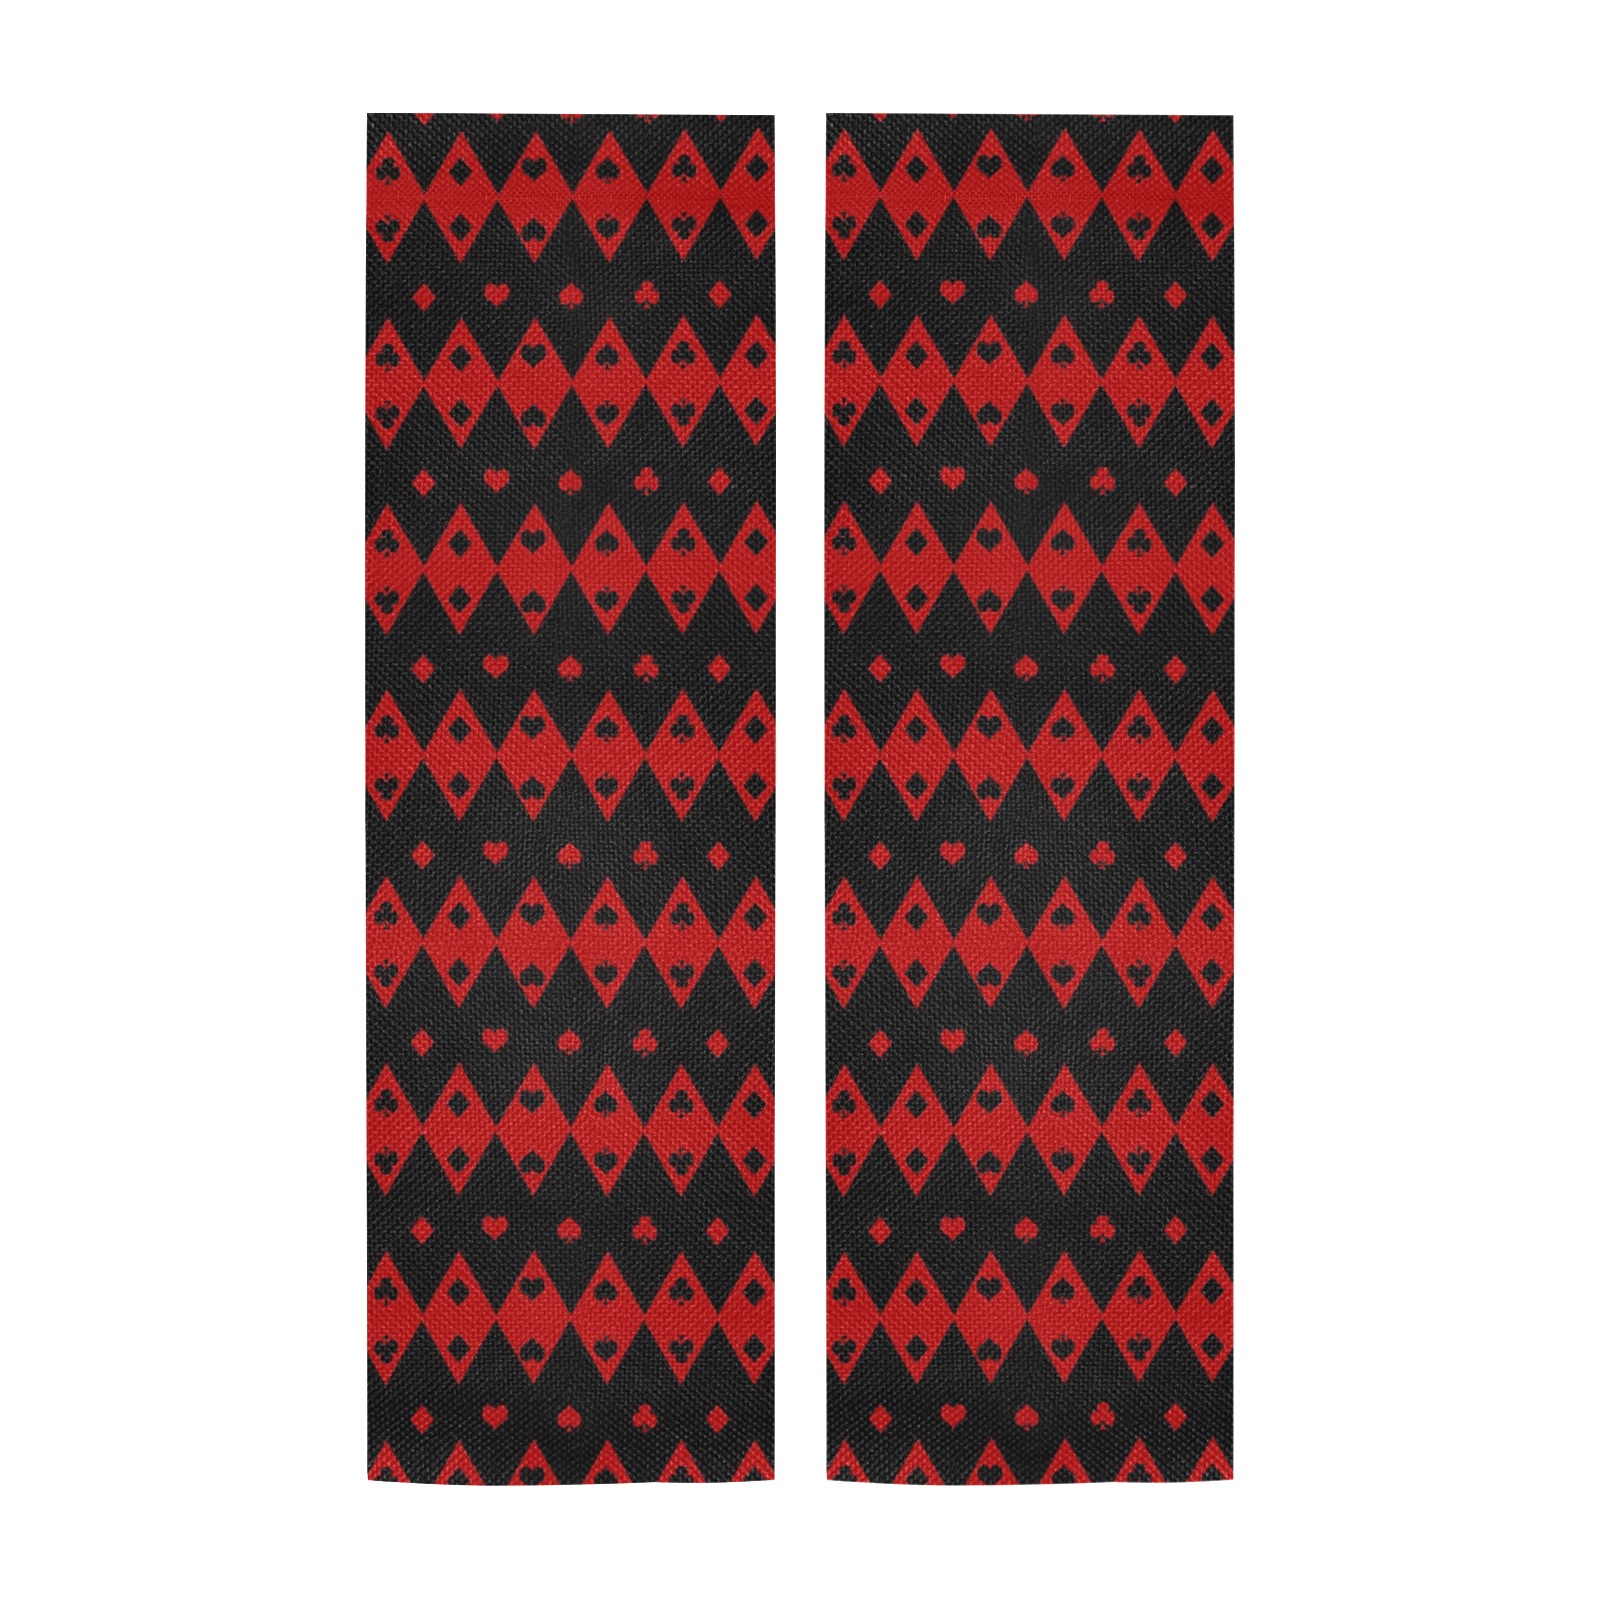 Black Red Play Card Shapes Door Curtain Tapestry